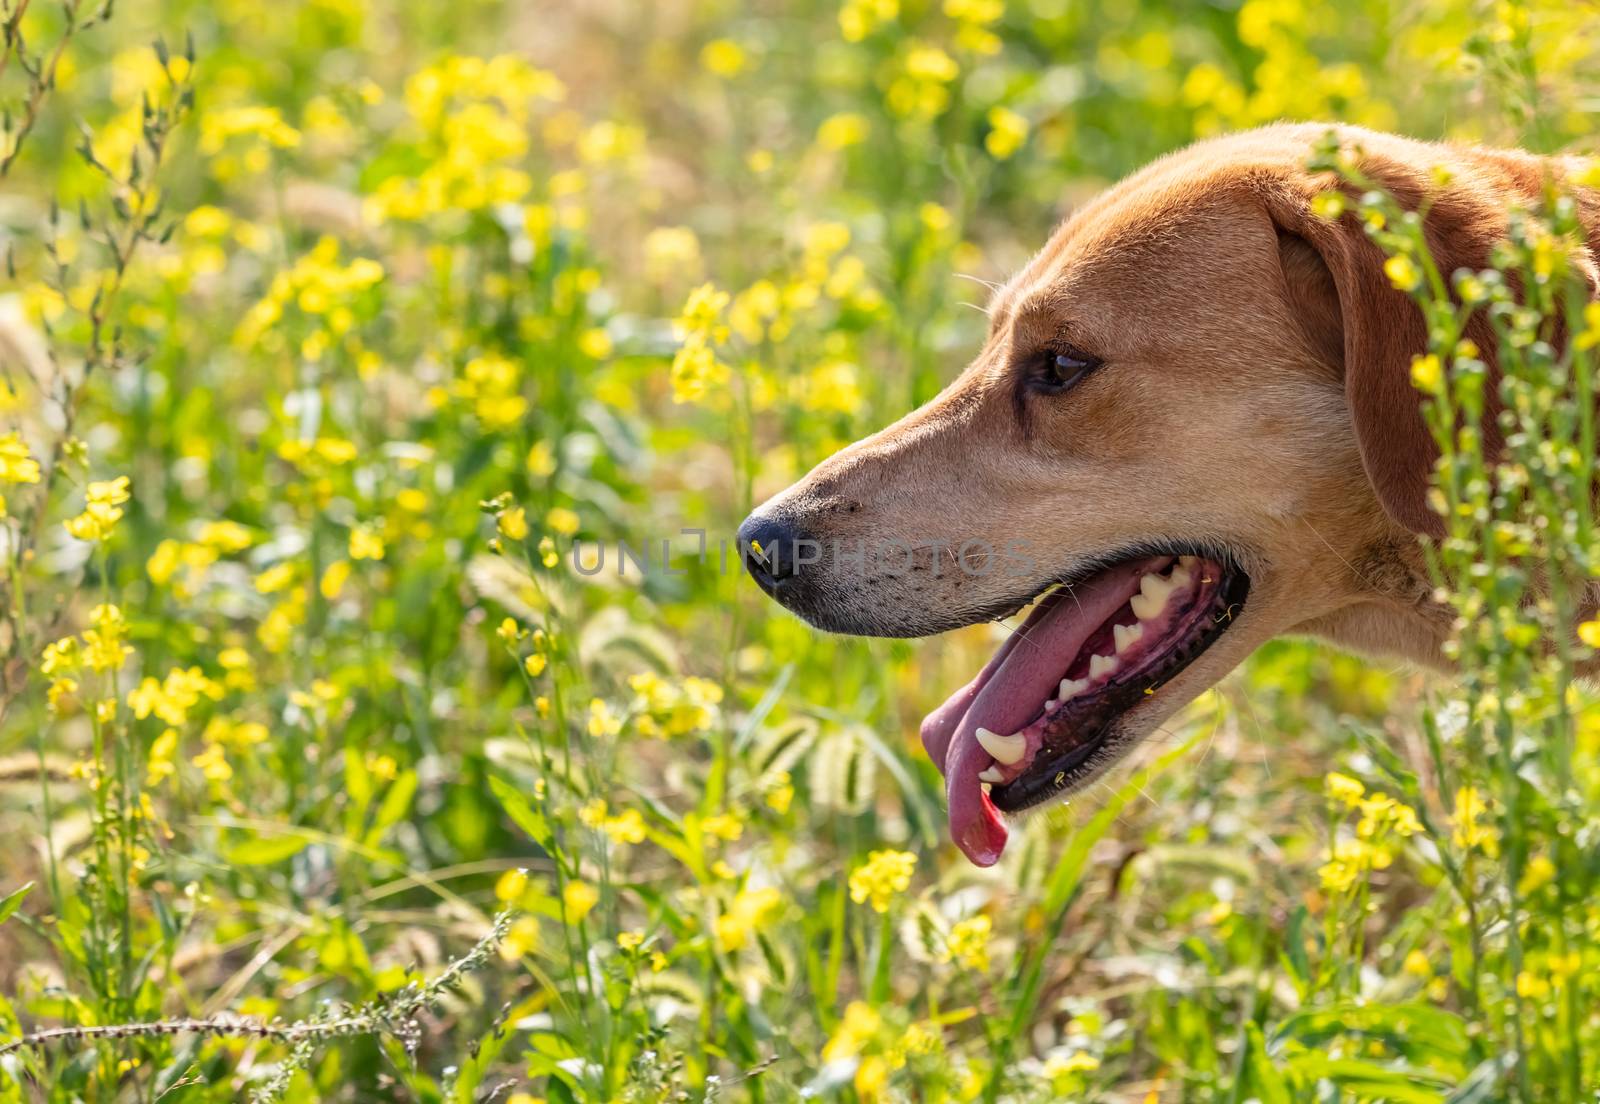 A close up shot of a brown hound dog hunting on a meadow blurred background. Meadow is full of green and yellow plants.